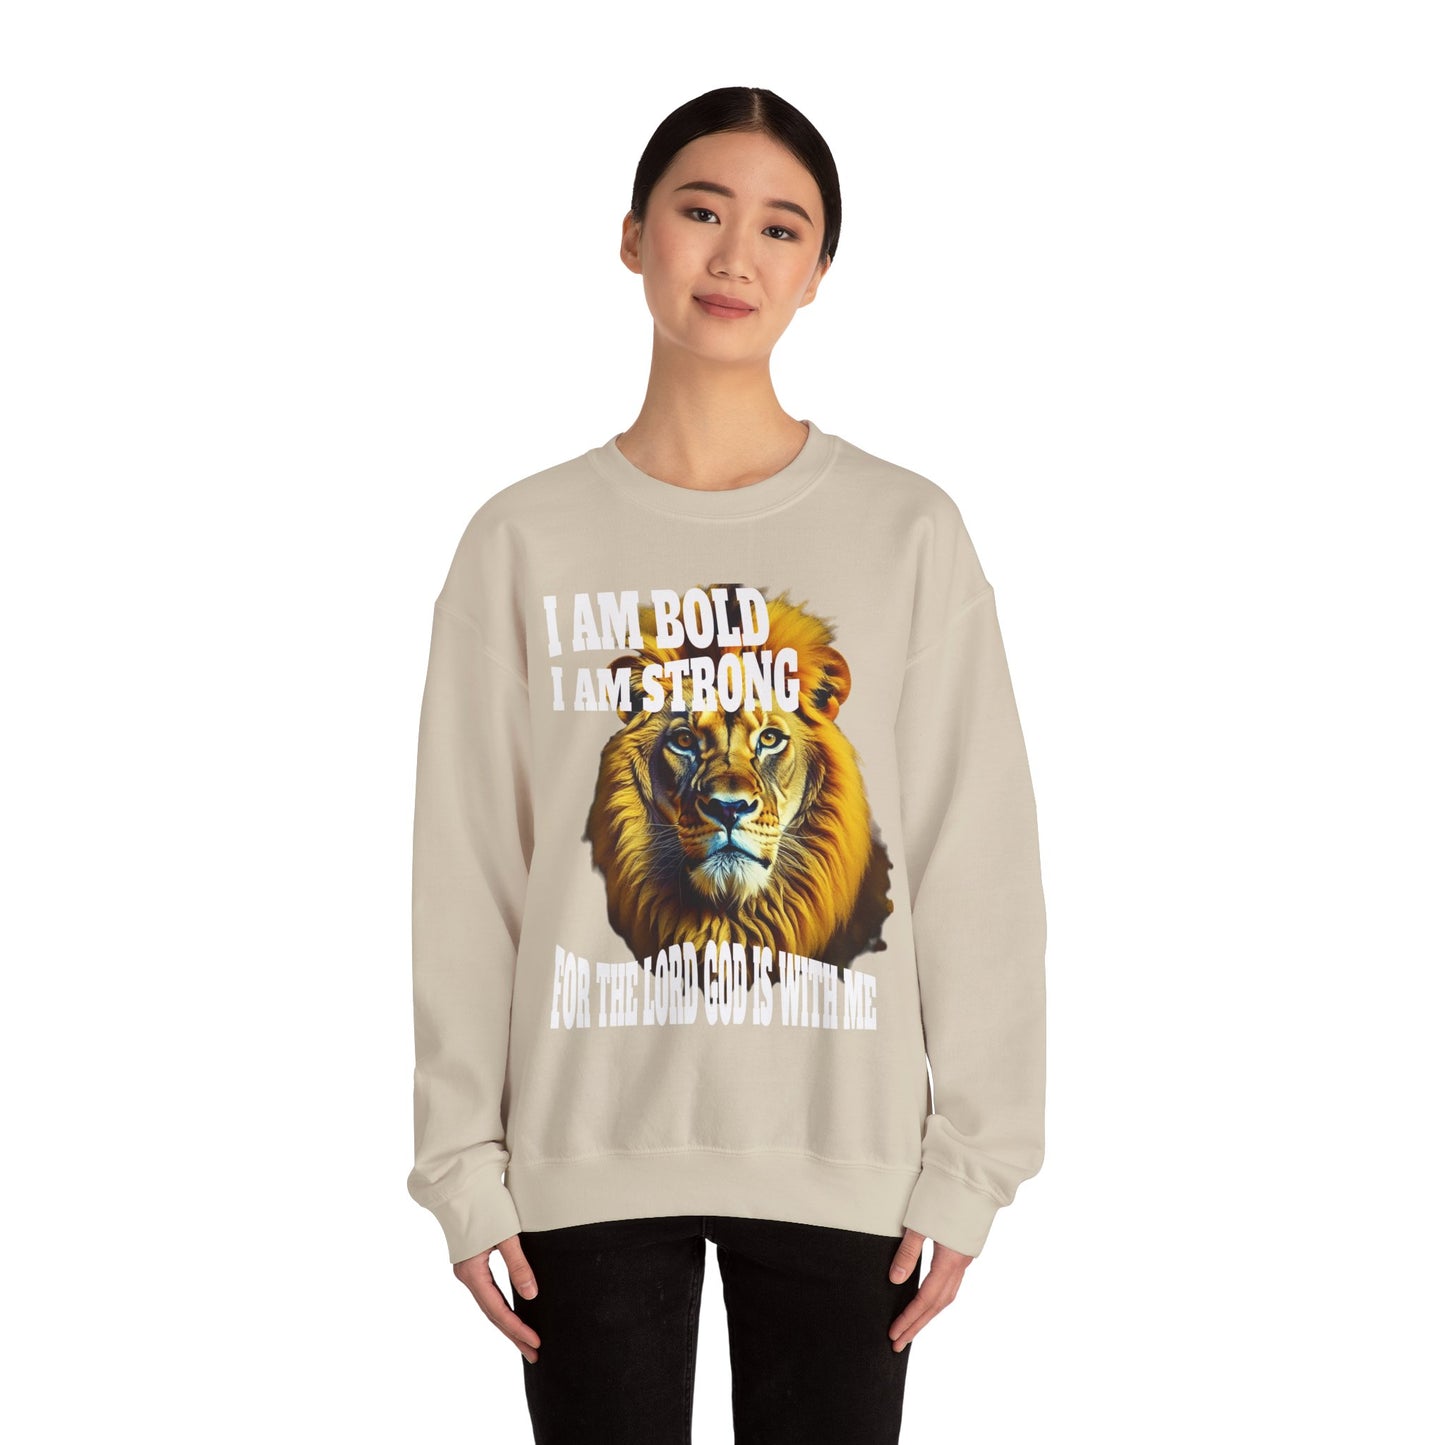 Top Design Sweatshirt, Unisex Heavy Blend™ Crewneck Sweatshirt, Inspirational, I Am Bold, I Am Strong, For The Lord God Is With Me.